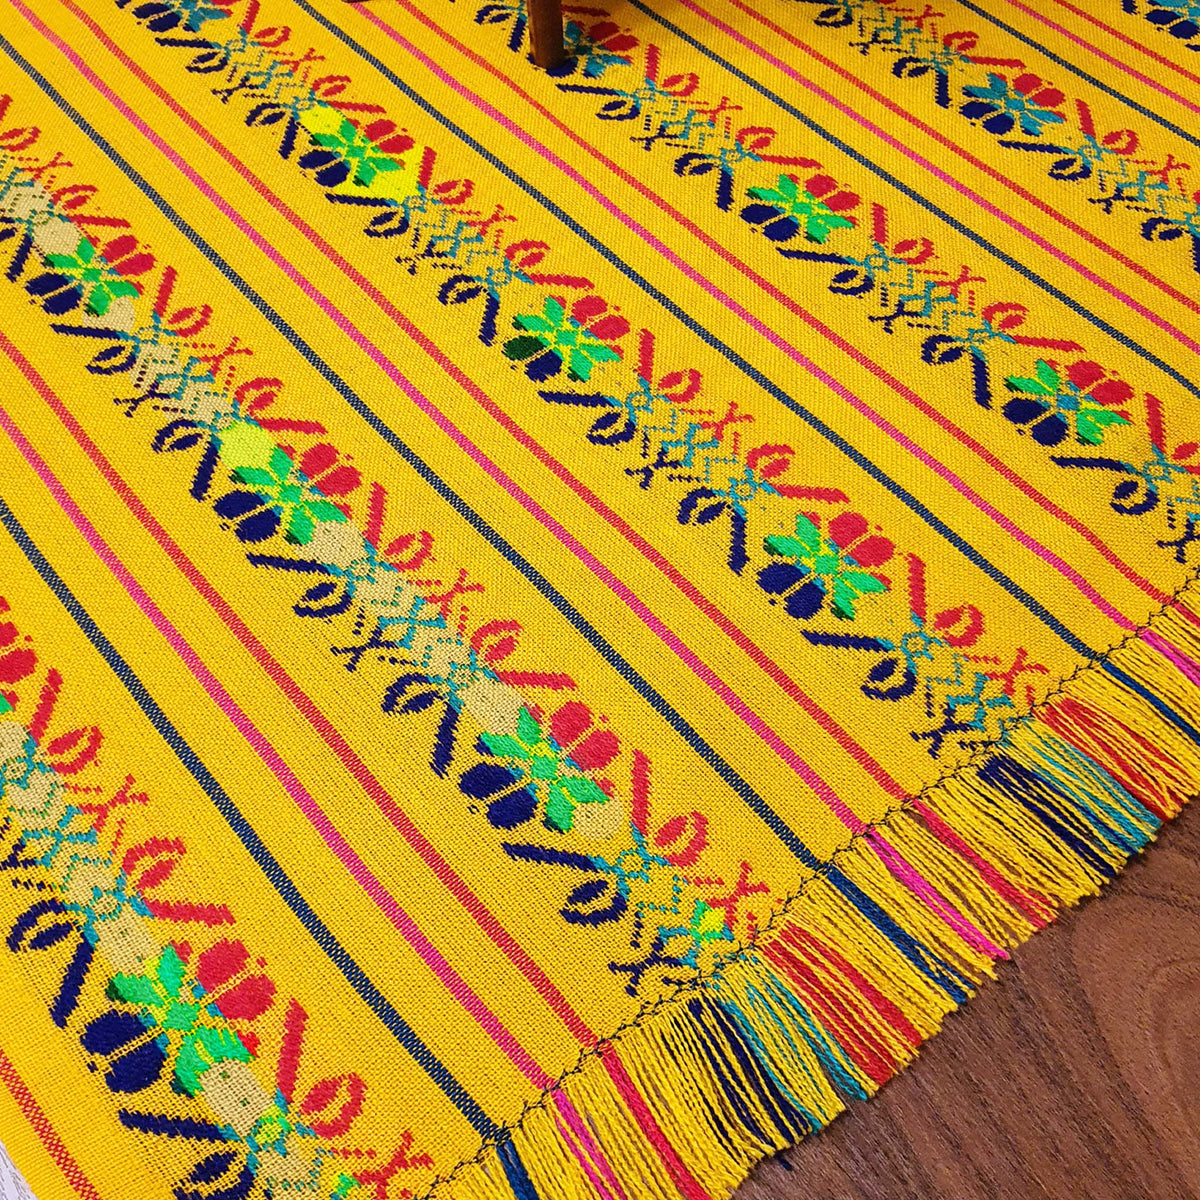 buy Mexican table runners, Mexican table runner near me, Mexican party table set up, mustard, woven, embroidered, aztec, mayan, pastel orange